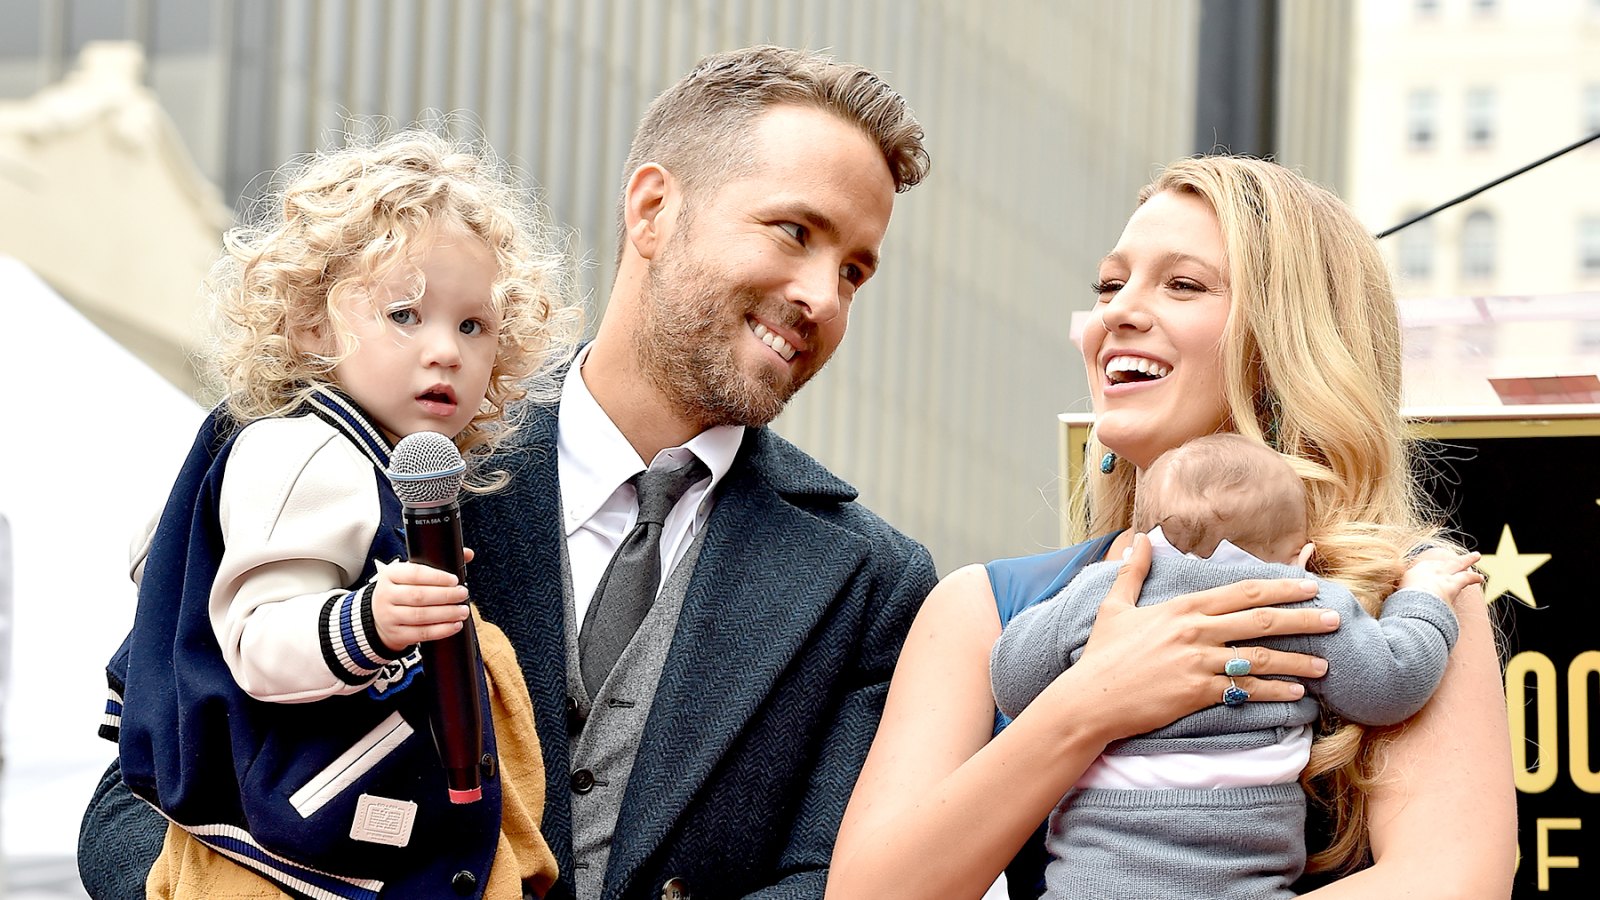 Ryan Reynolds and Blake Lively with daughters James Reynolds and Ines Reynolds attend the ceremony honoring Ryan Reynolds with a Star on the Hollywood Walk of Fame on December 15, 2016 in Hollywood, California.